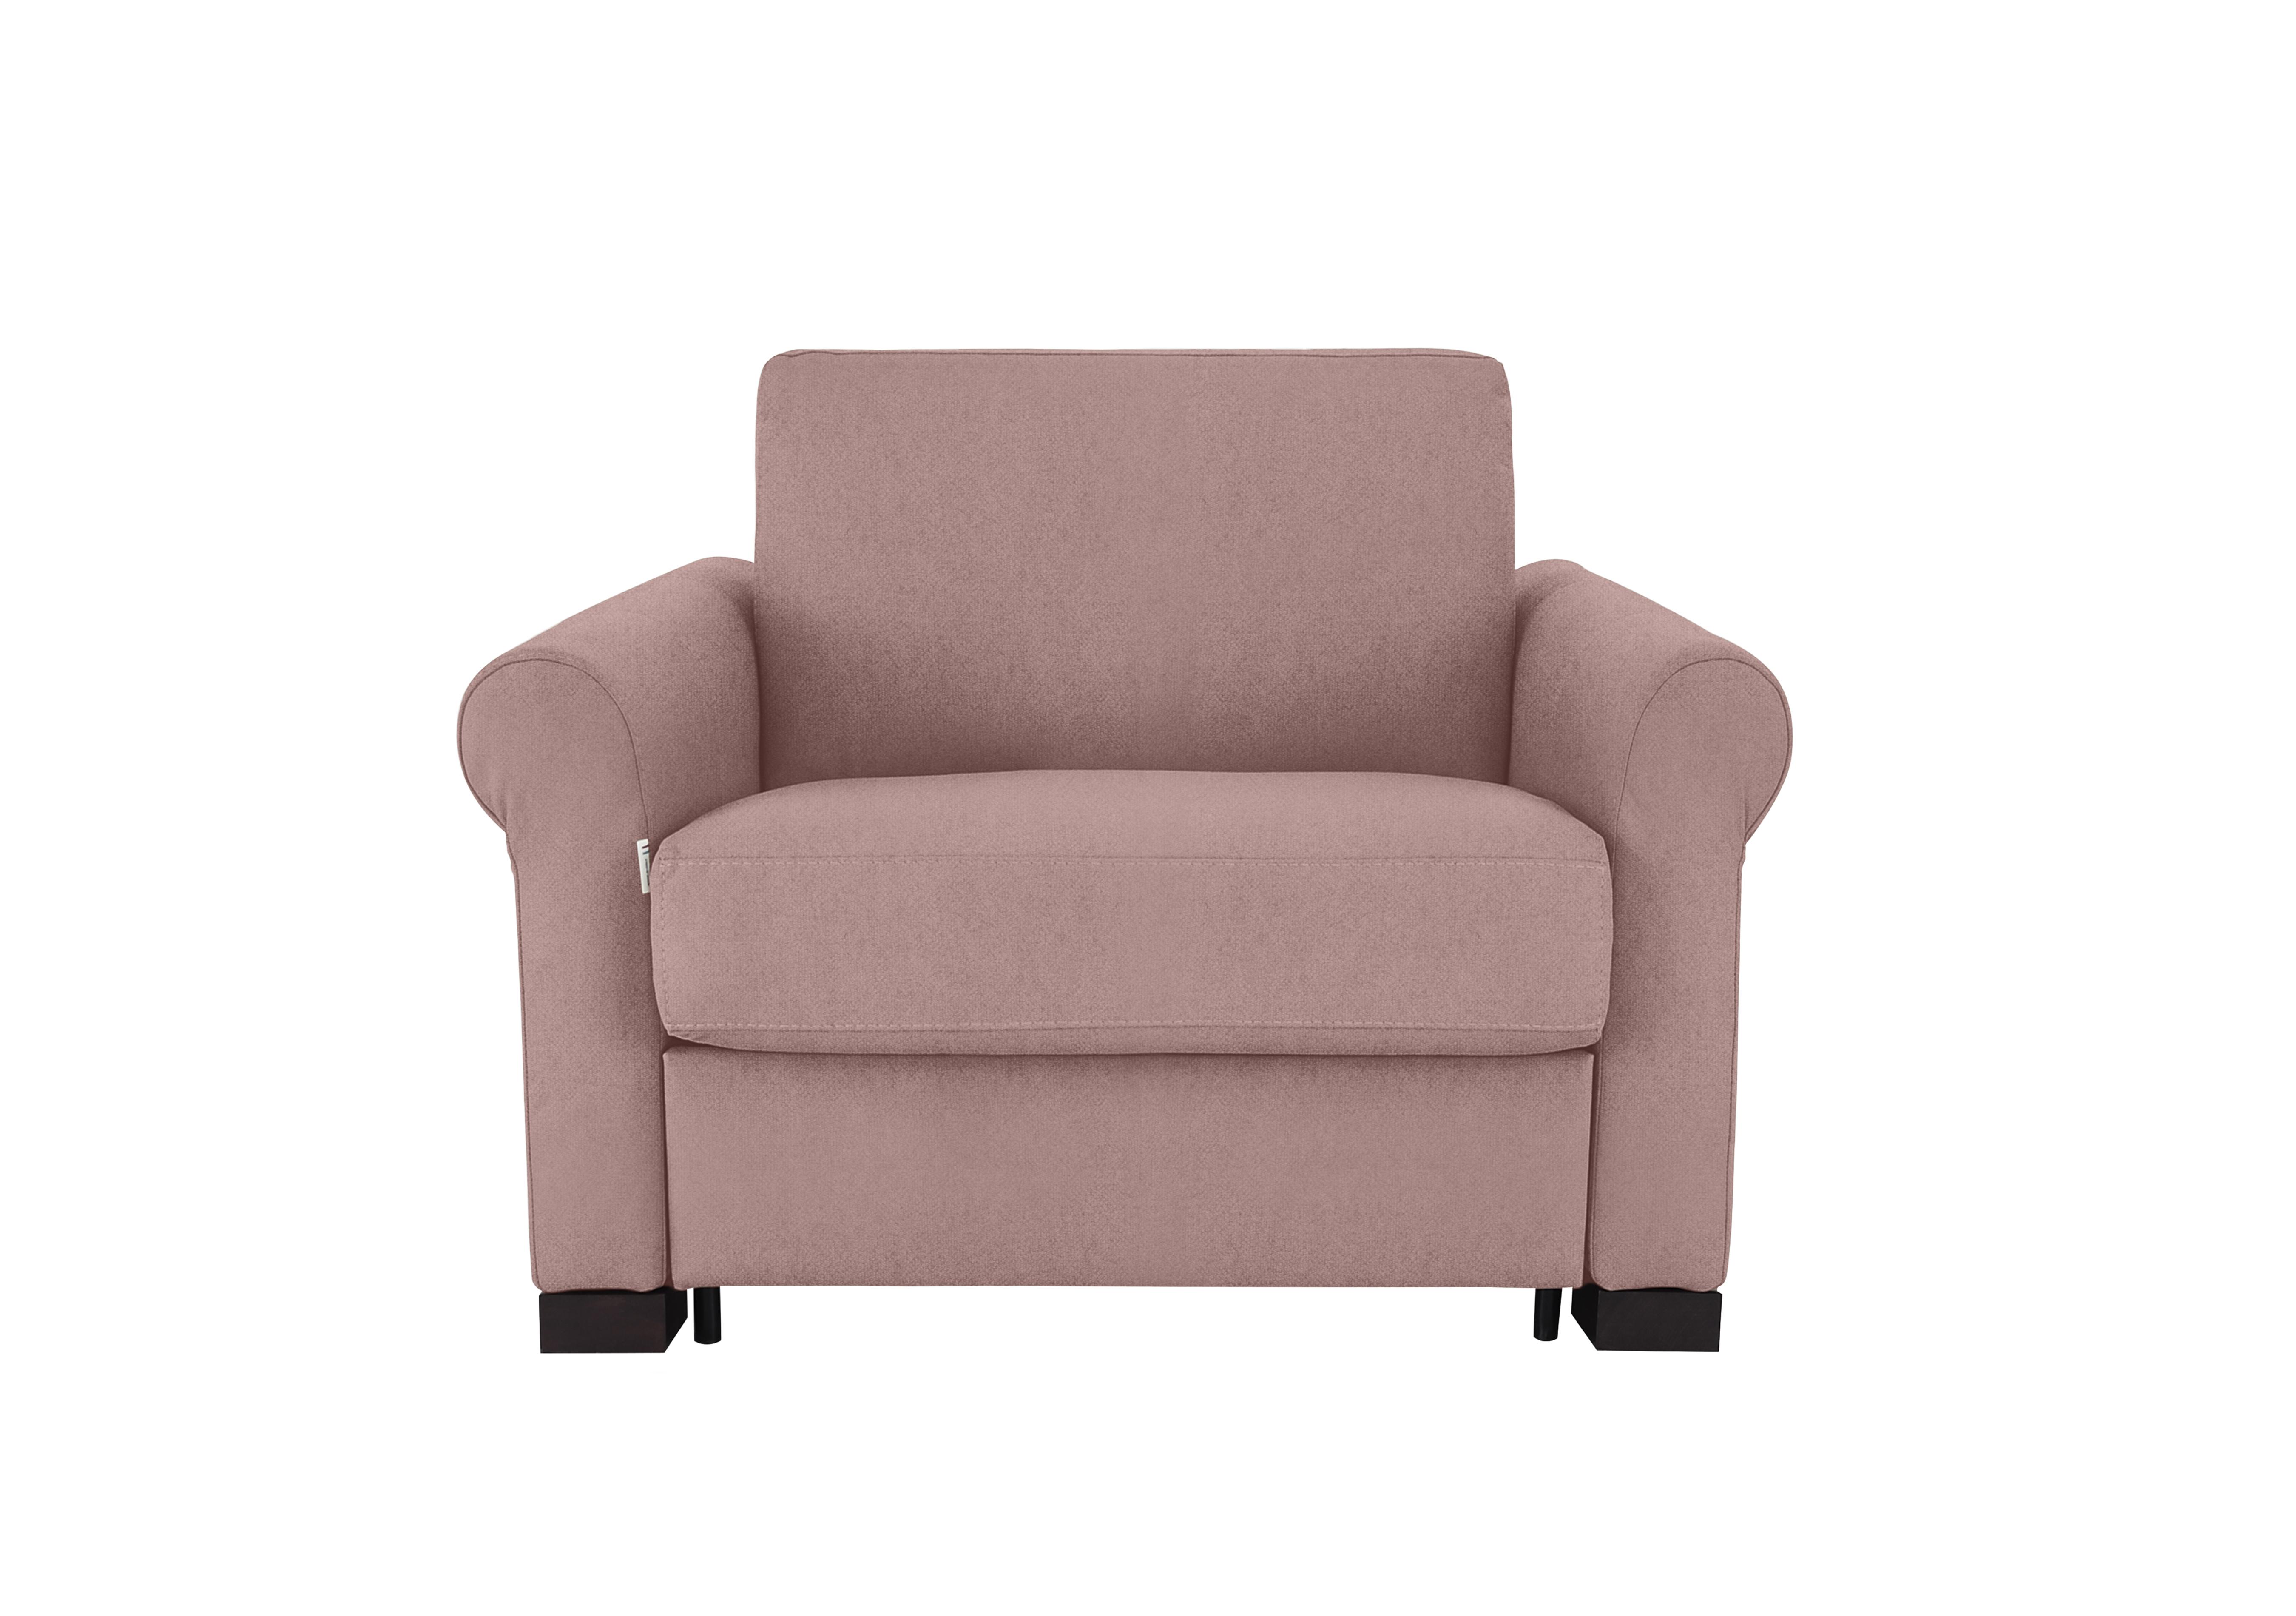 Alcova Fabric Chair Sofa Bed with Scroll Arms in Fuente Coral on Furniture Village